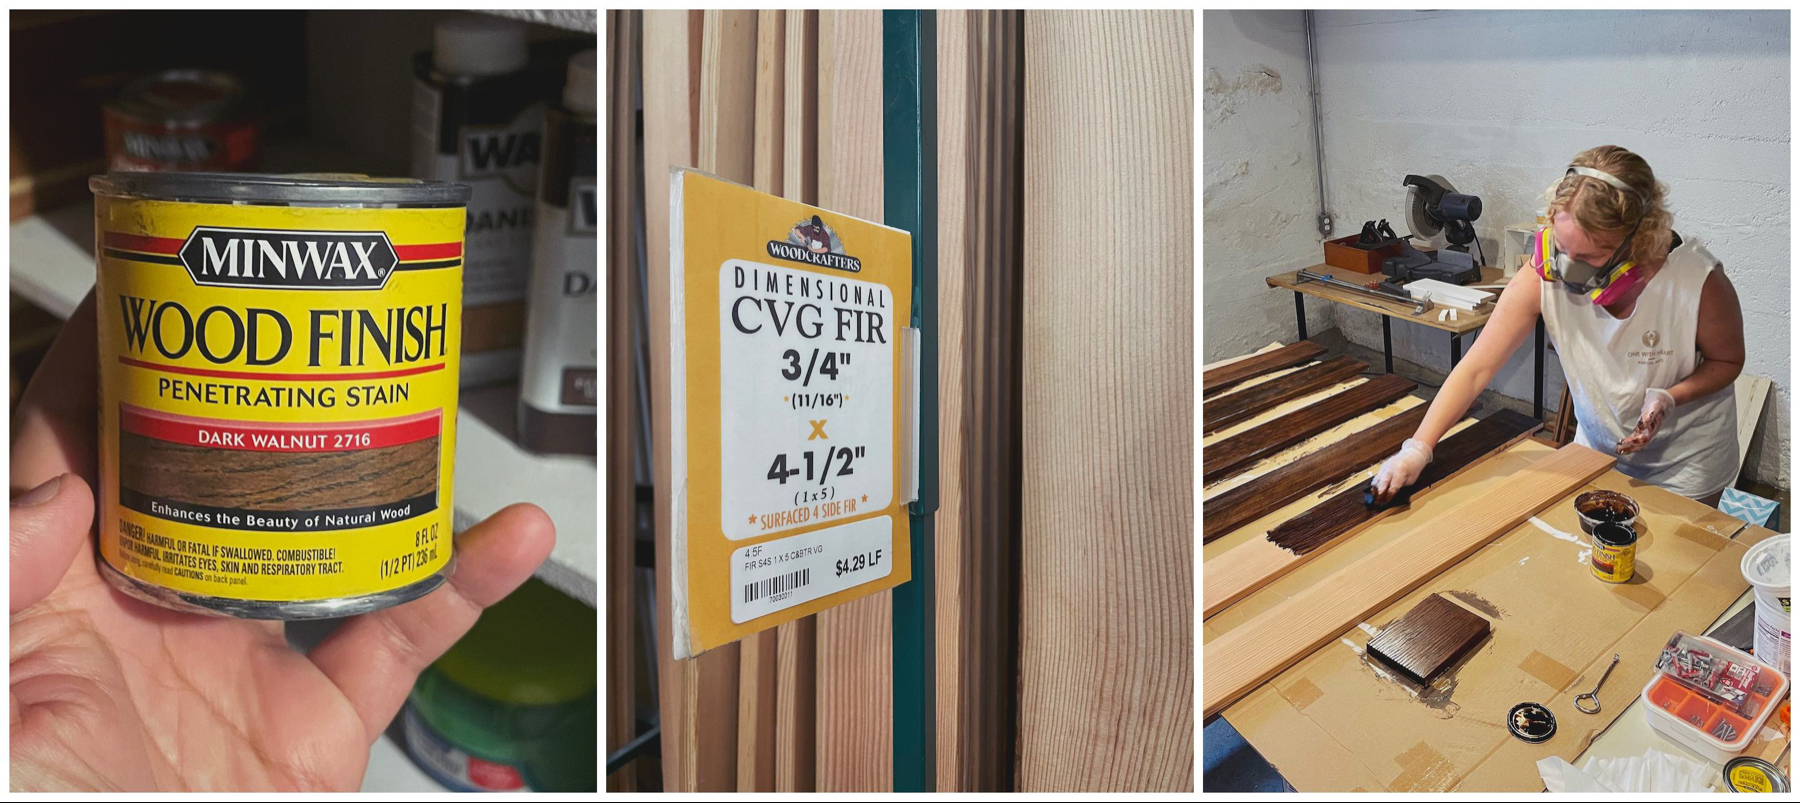 A triptych of ca can of dark walnut stain, lumber stacked in a store showing a price of $4.29 per linear foot, and Jenni applying the stain to the boards while wearing a respirator.